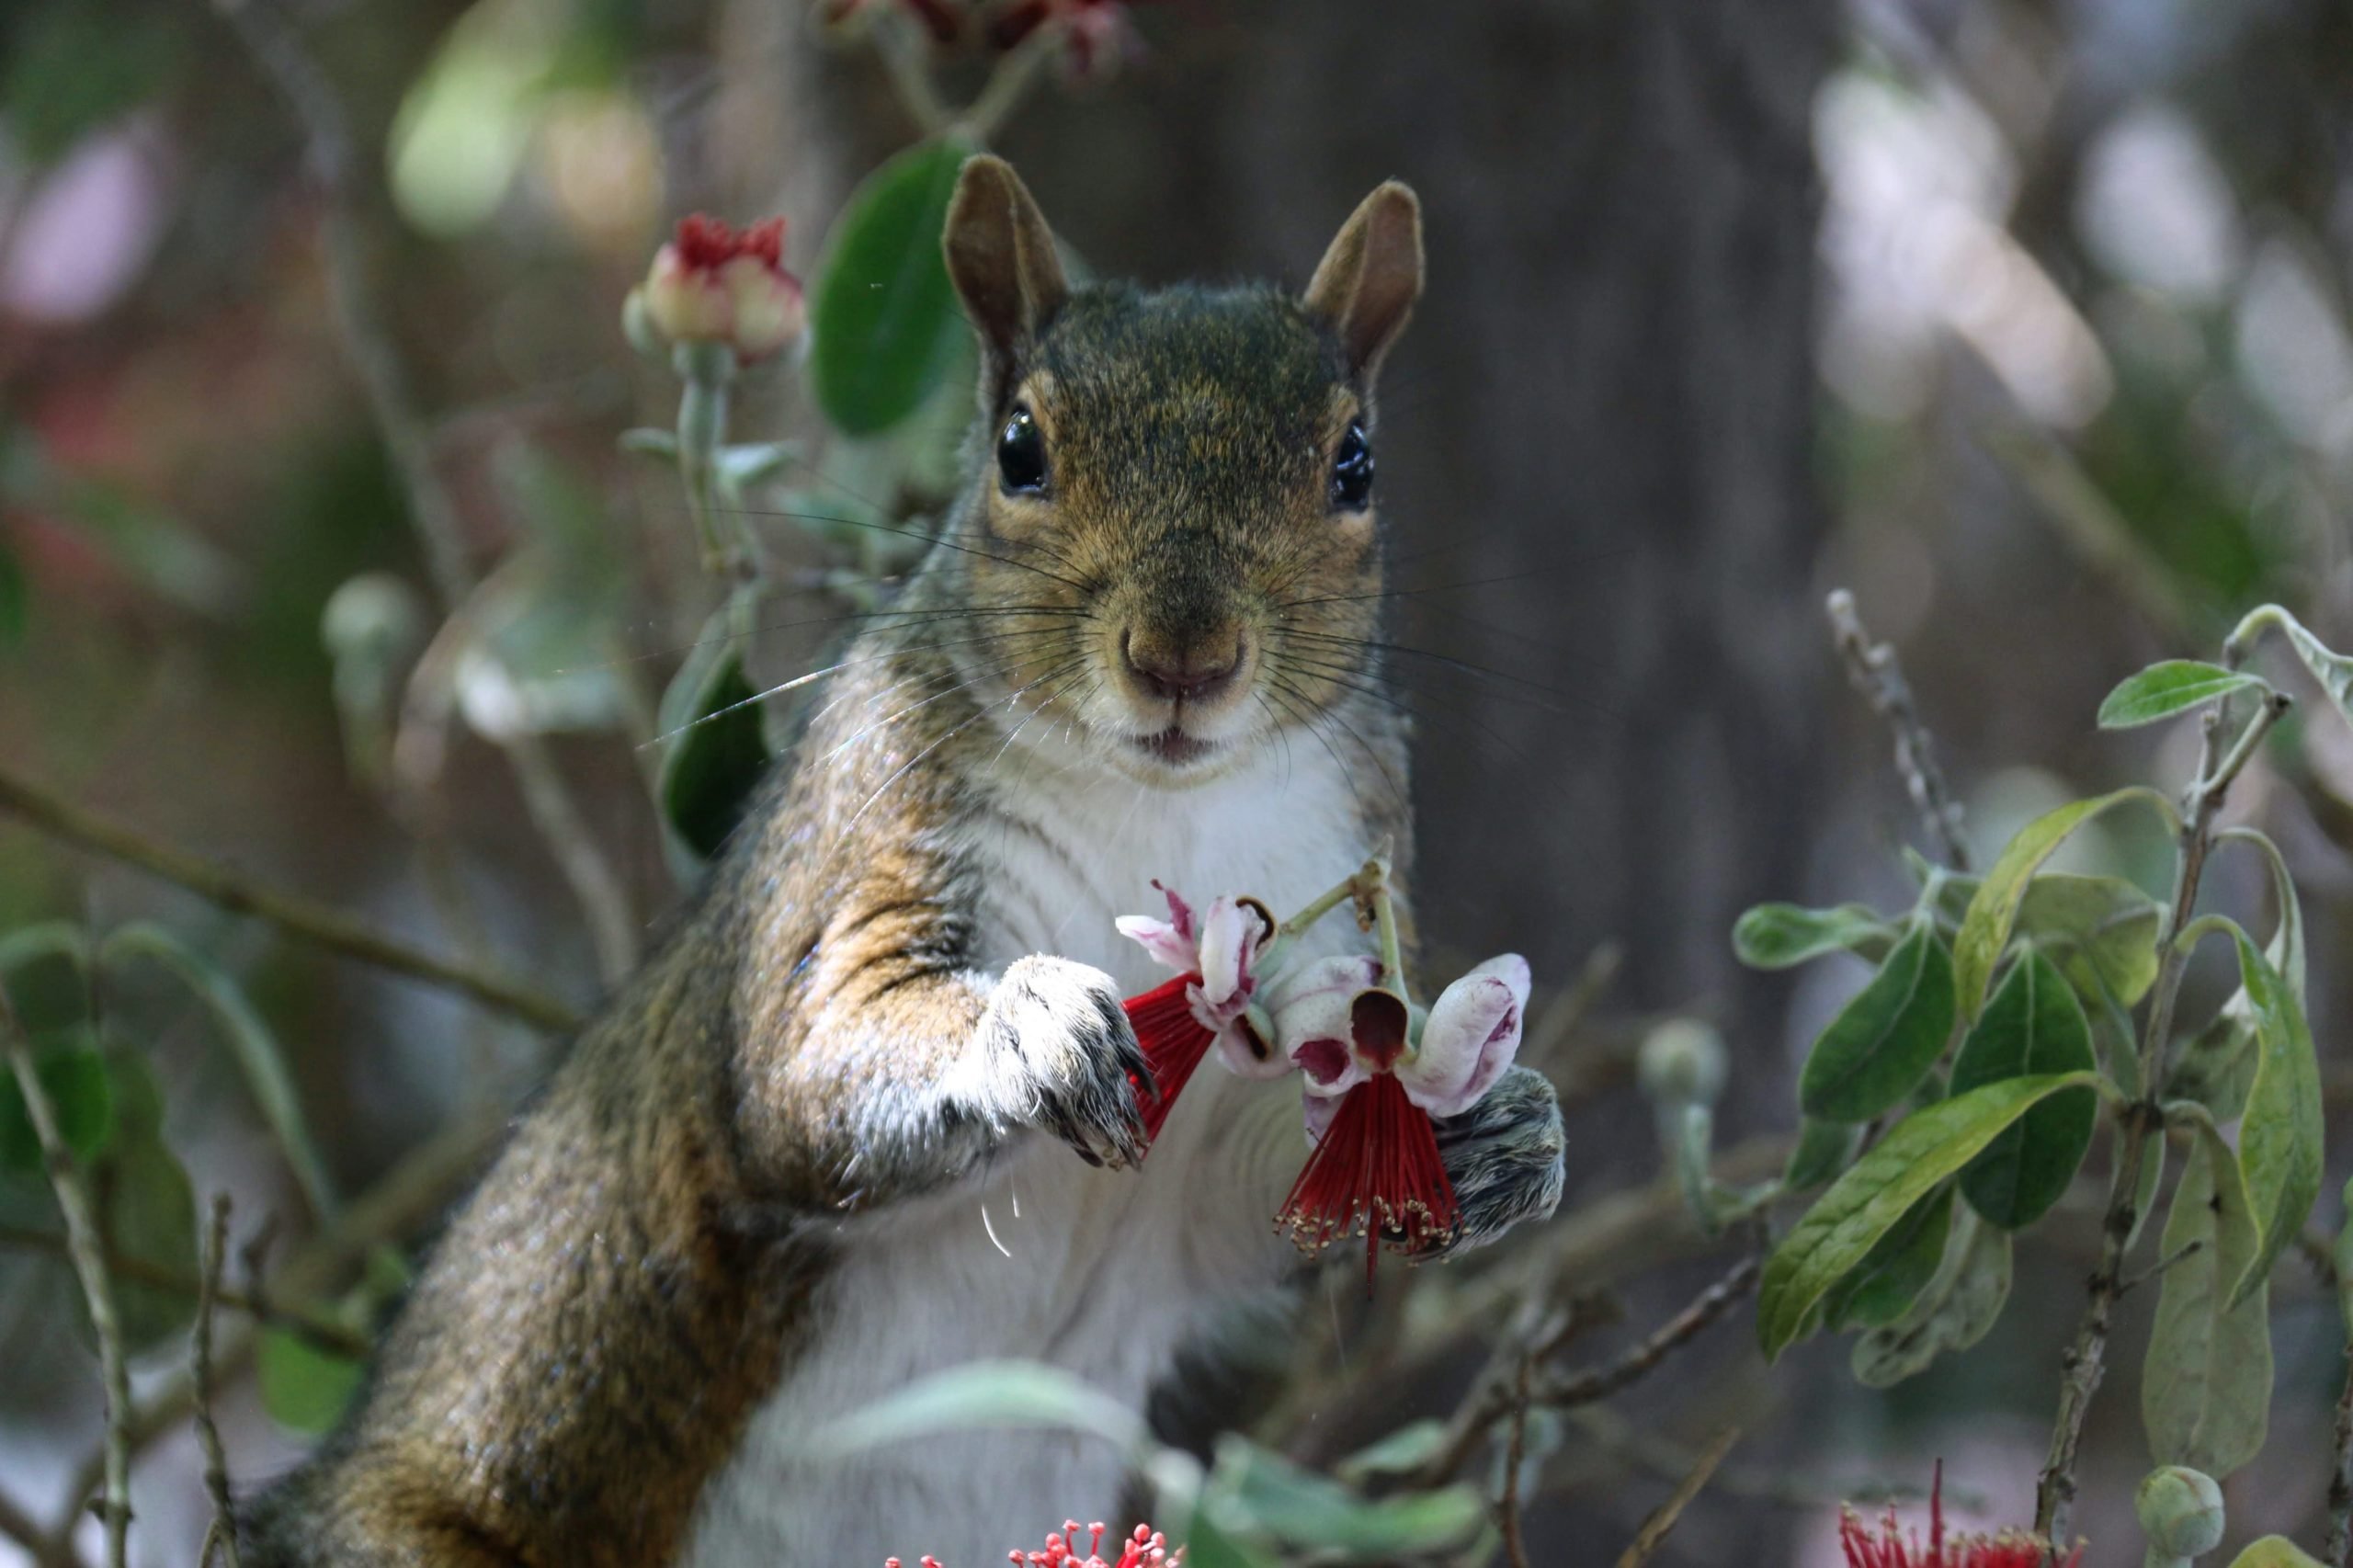 An eastern gray squirrel eats flowers of Acca sellowiana in front of Stern.